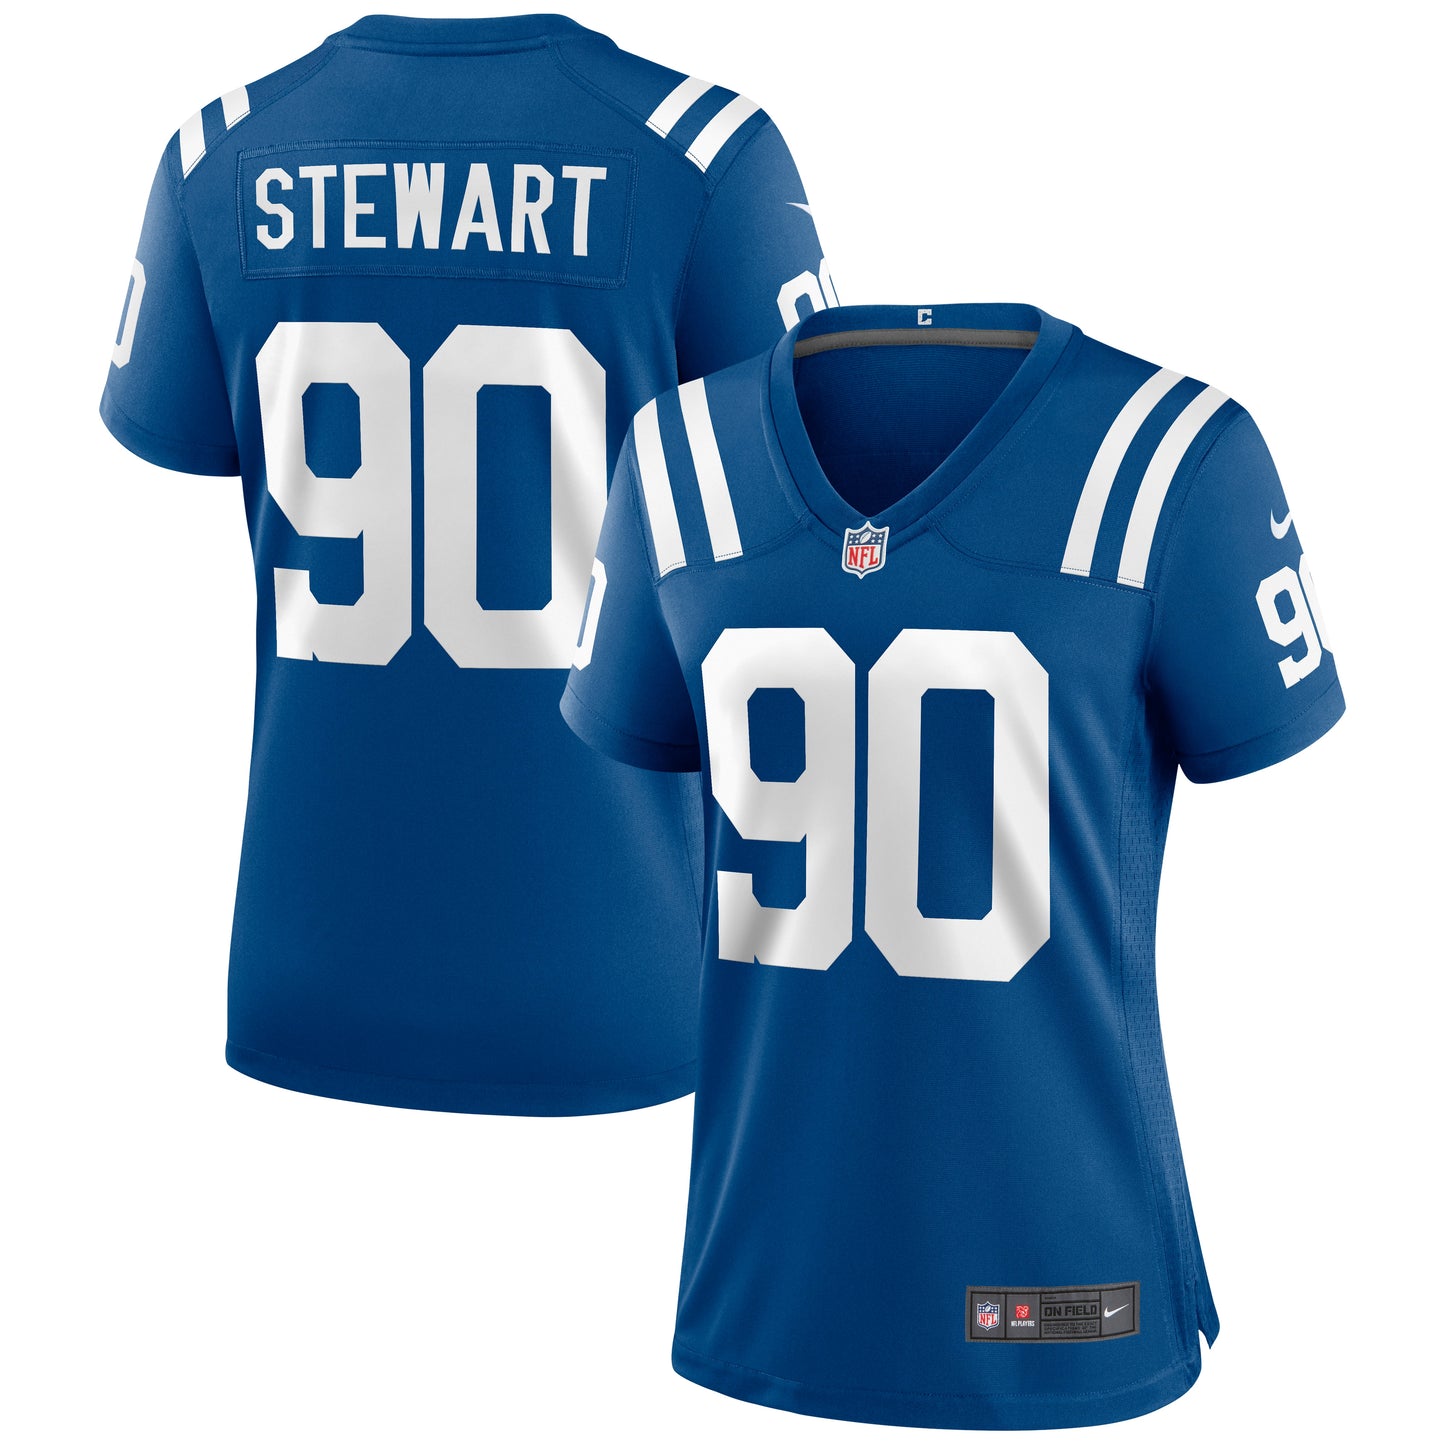 Grover Stewart Indianapolis Colts Nike Women's Game Jersey - Royal